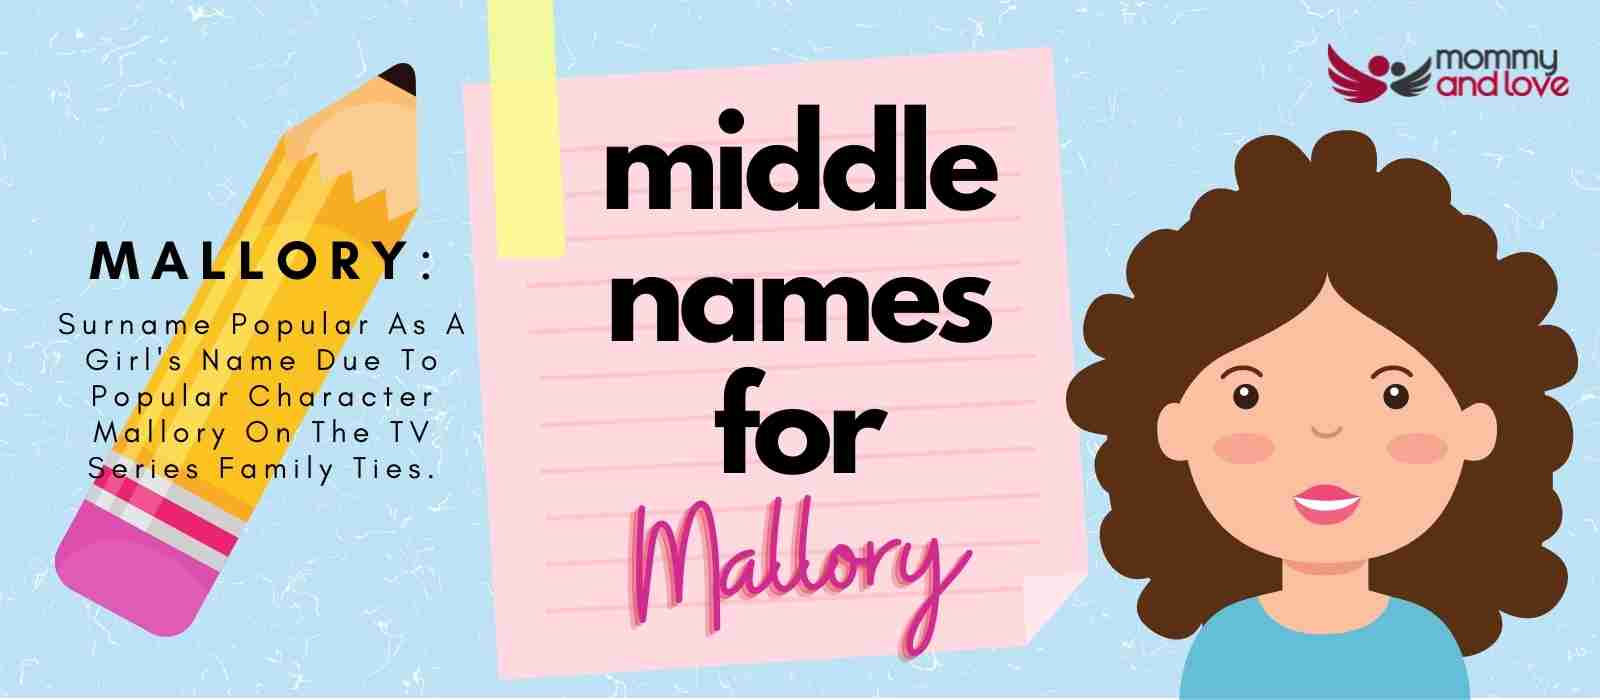 Middle Names for Mallory